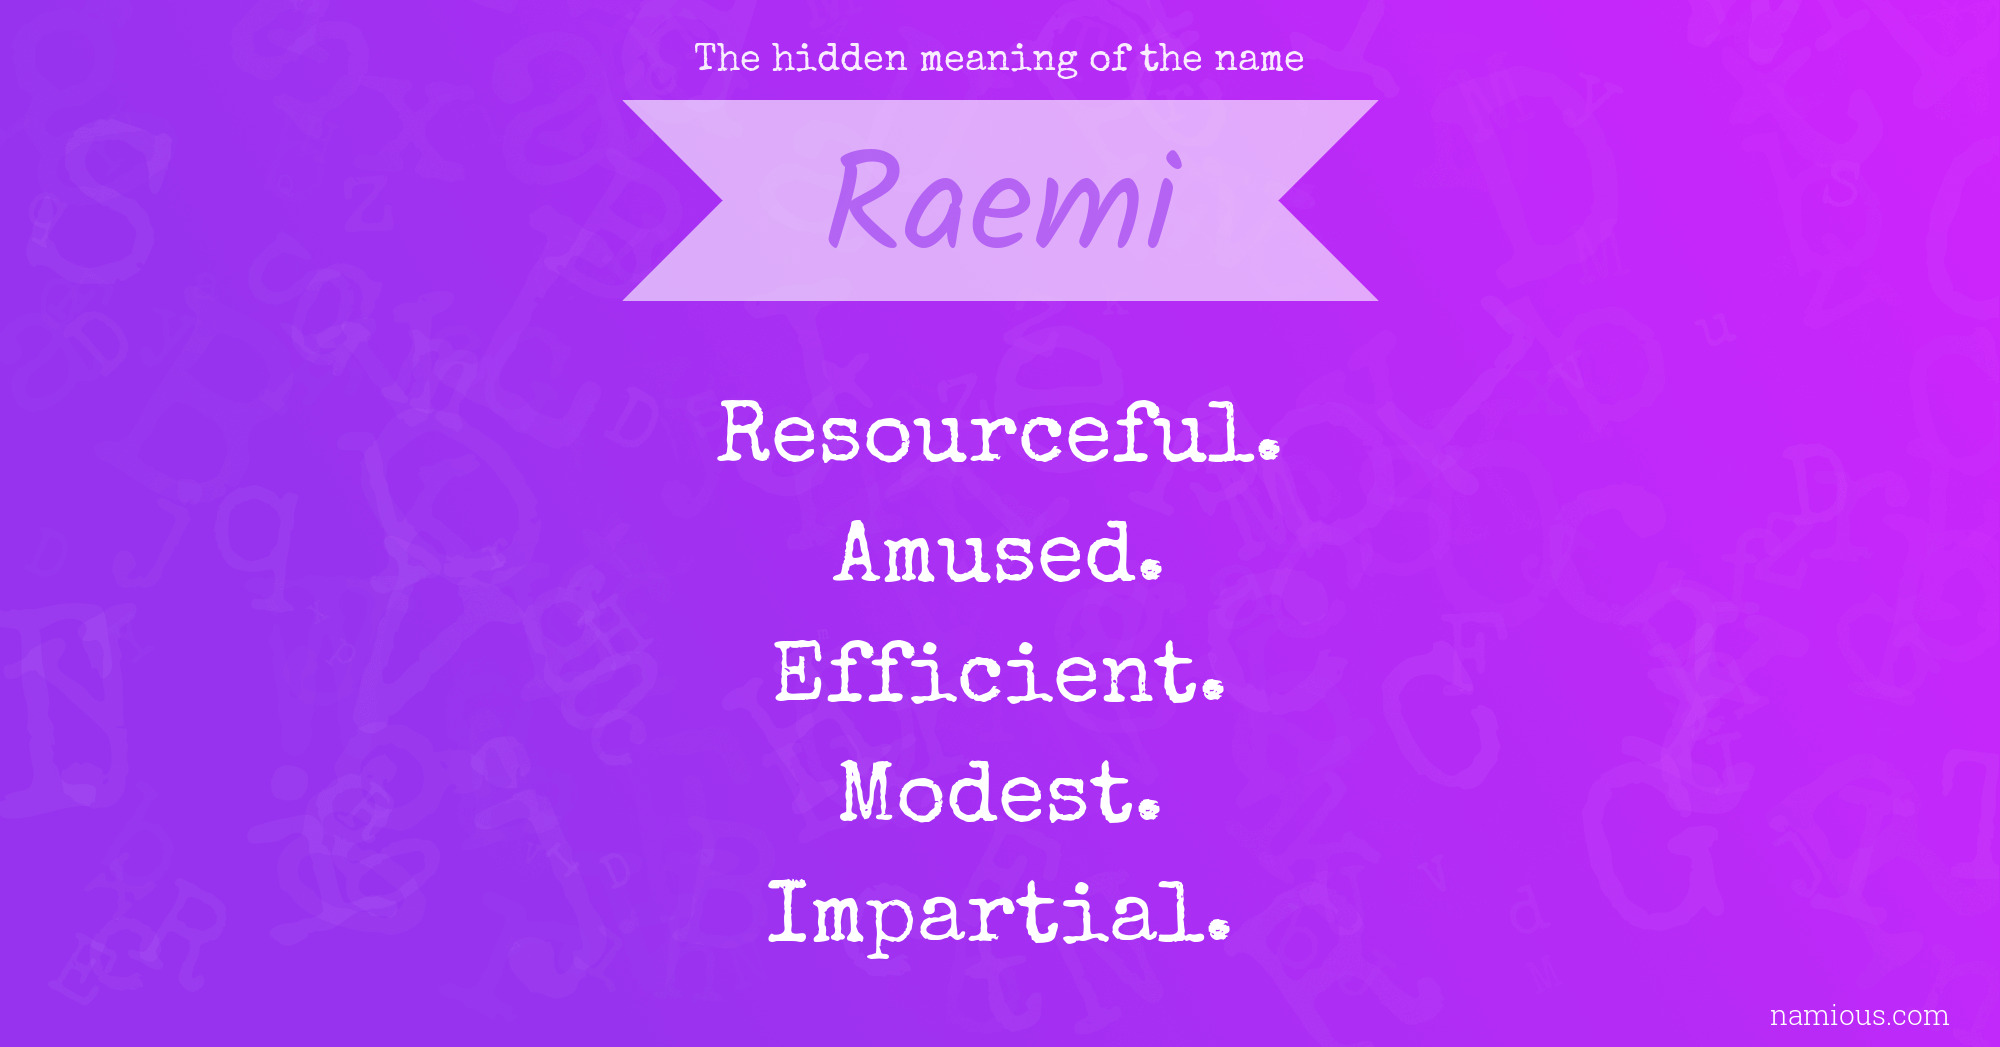 The hidden meaning of the name Raemi